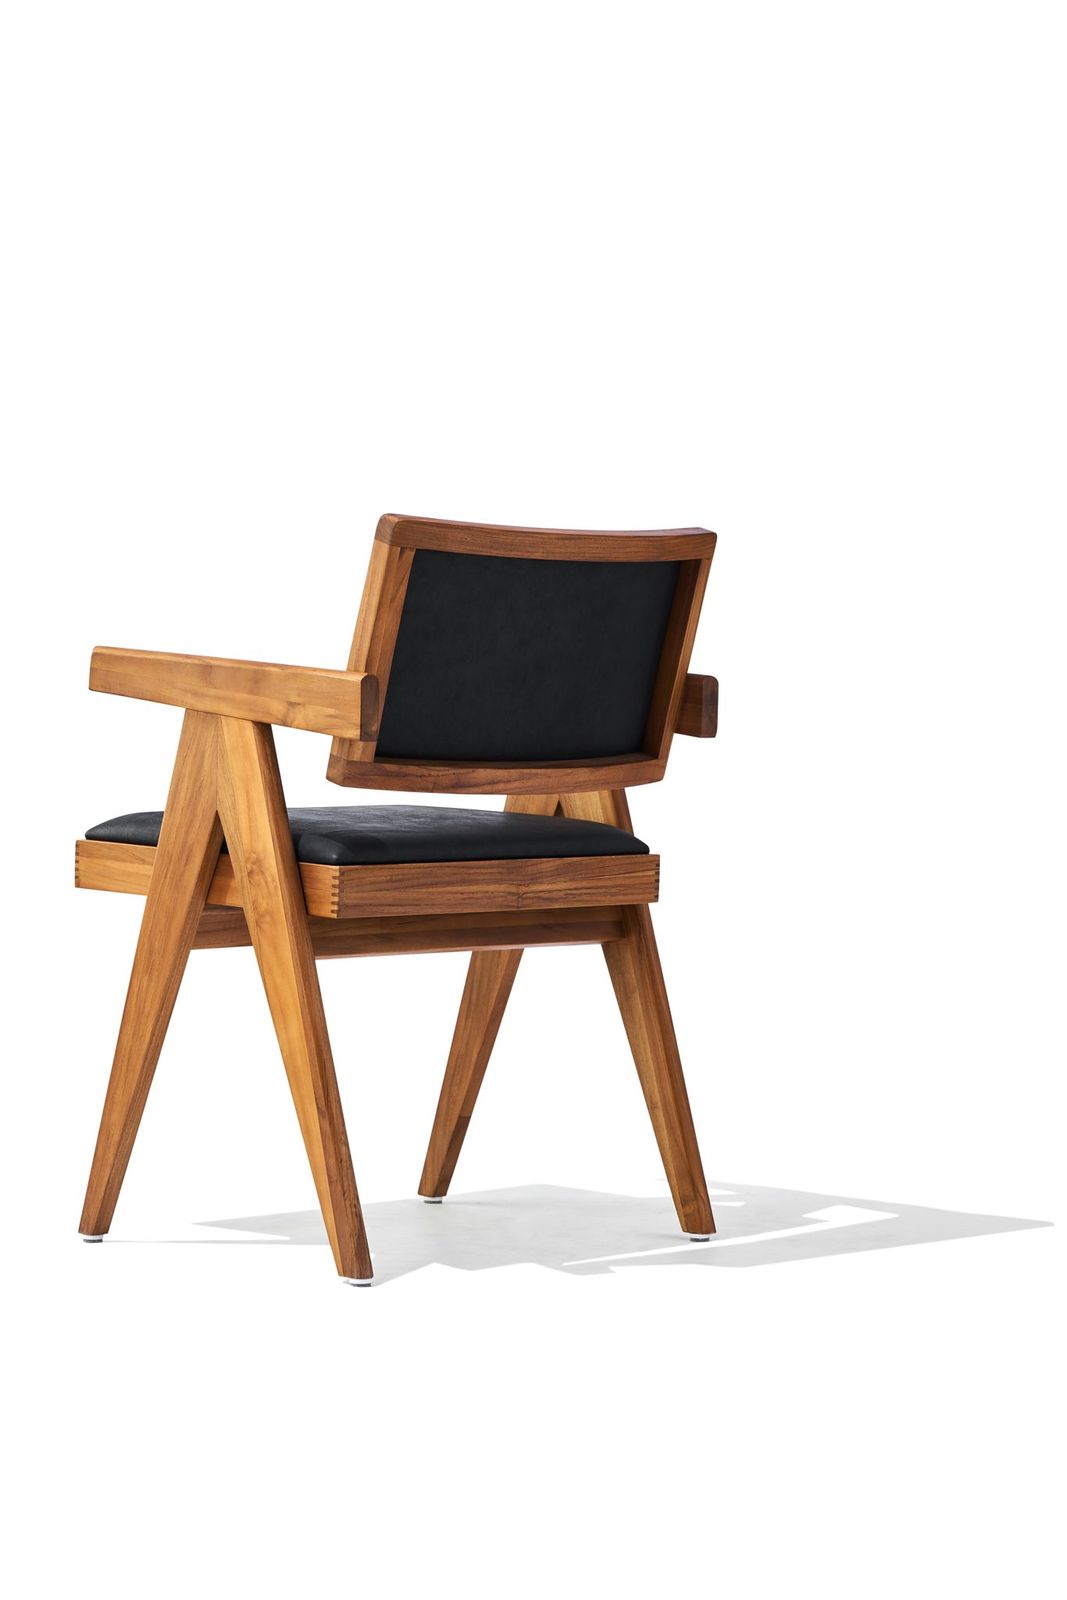 Pierre J. Armchair - Seat & Back Upholstery by Soho Concept